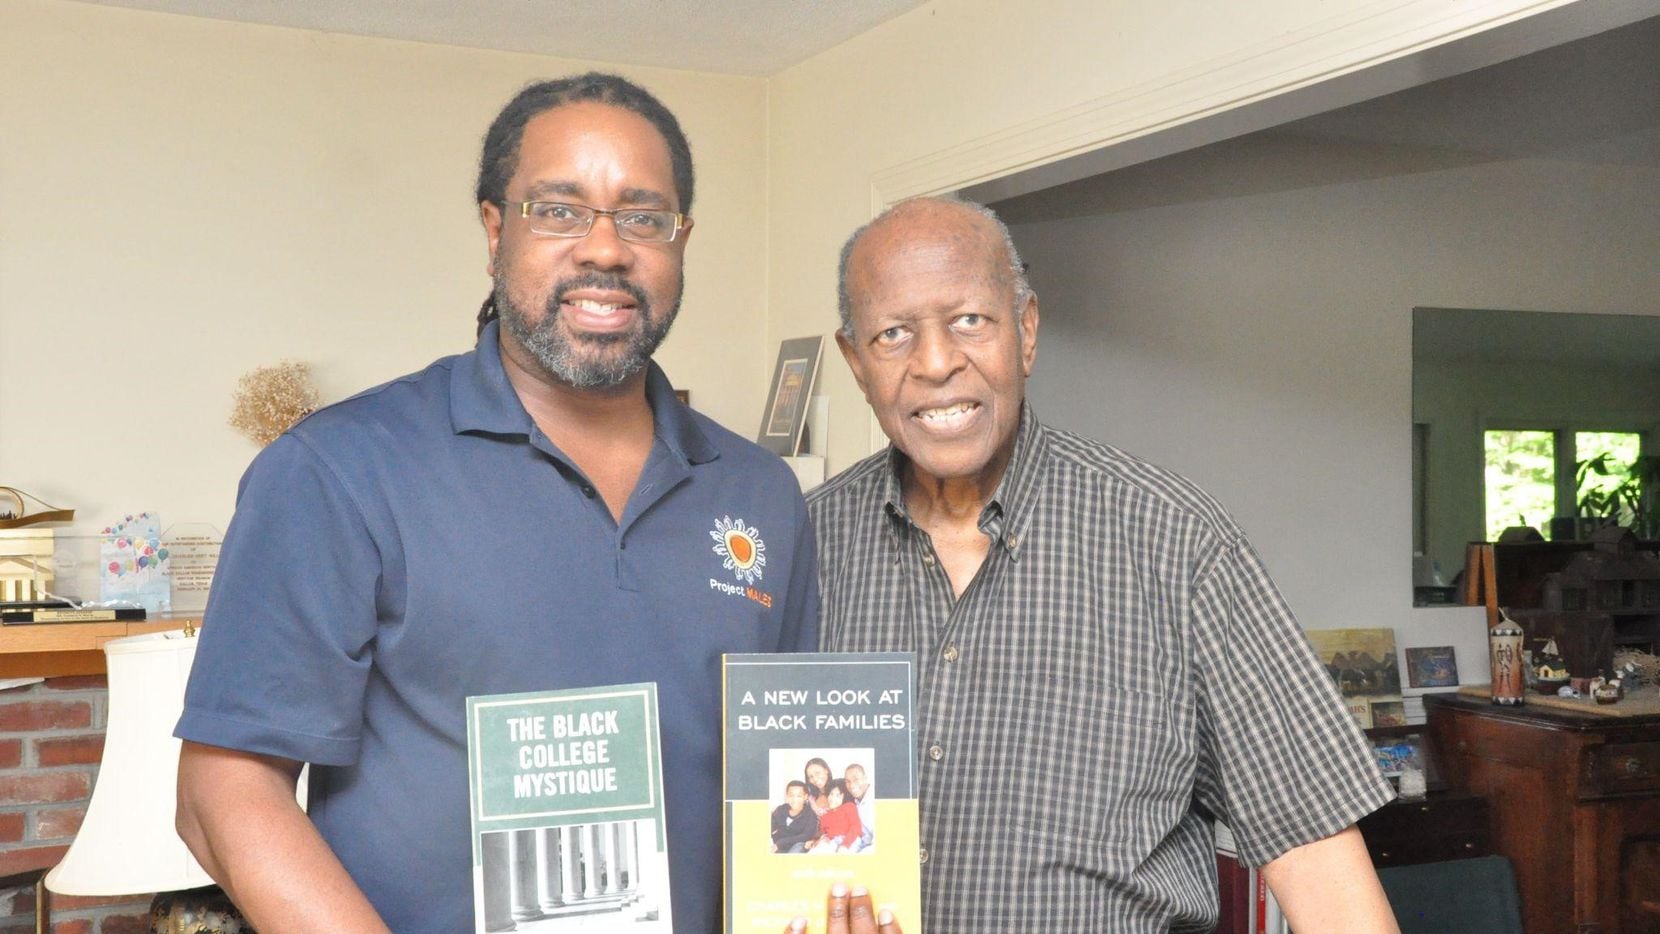 The author, Richard J. Reddick, left, poses with his former professor, mentor and book...